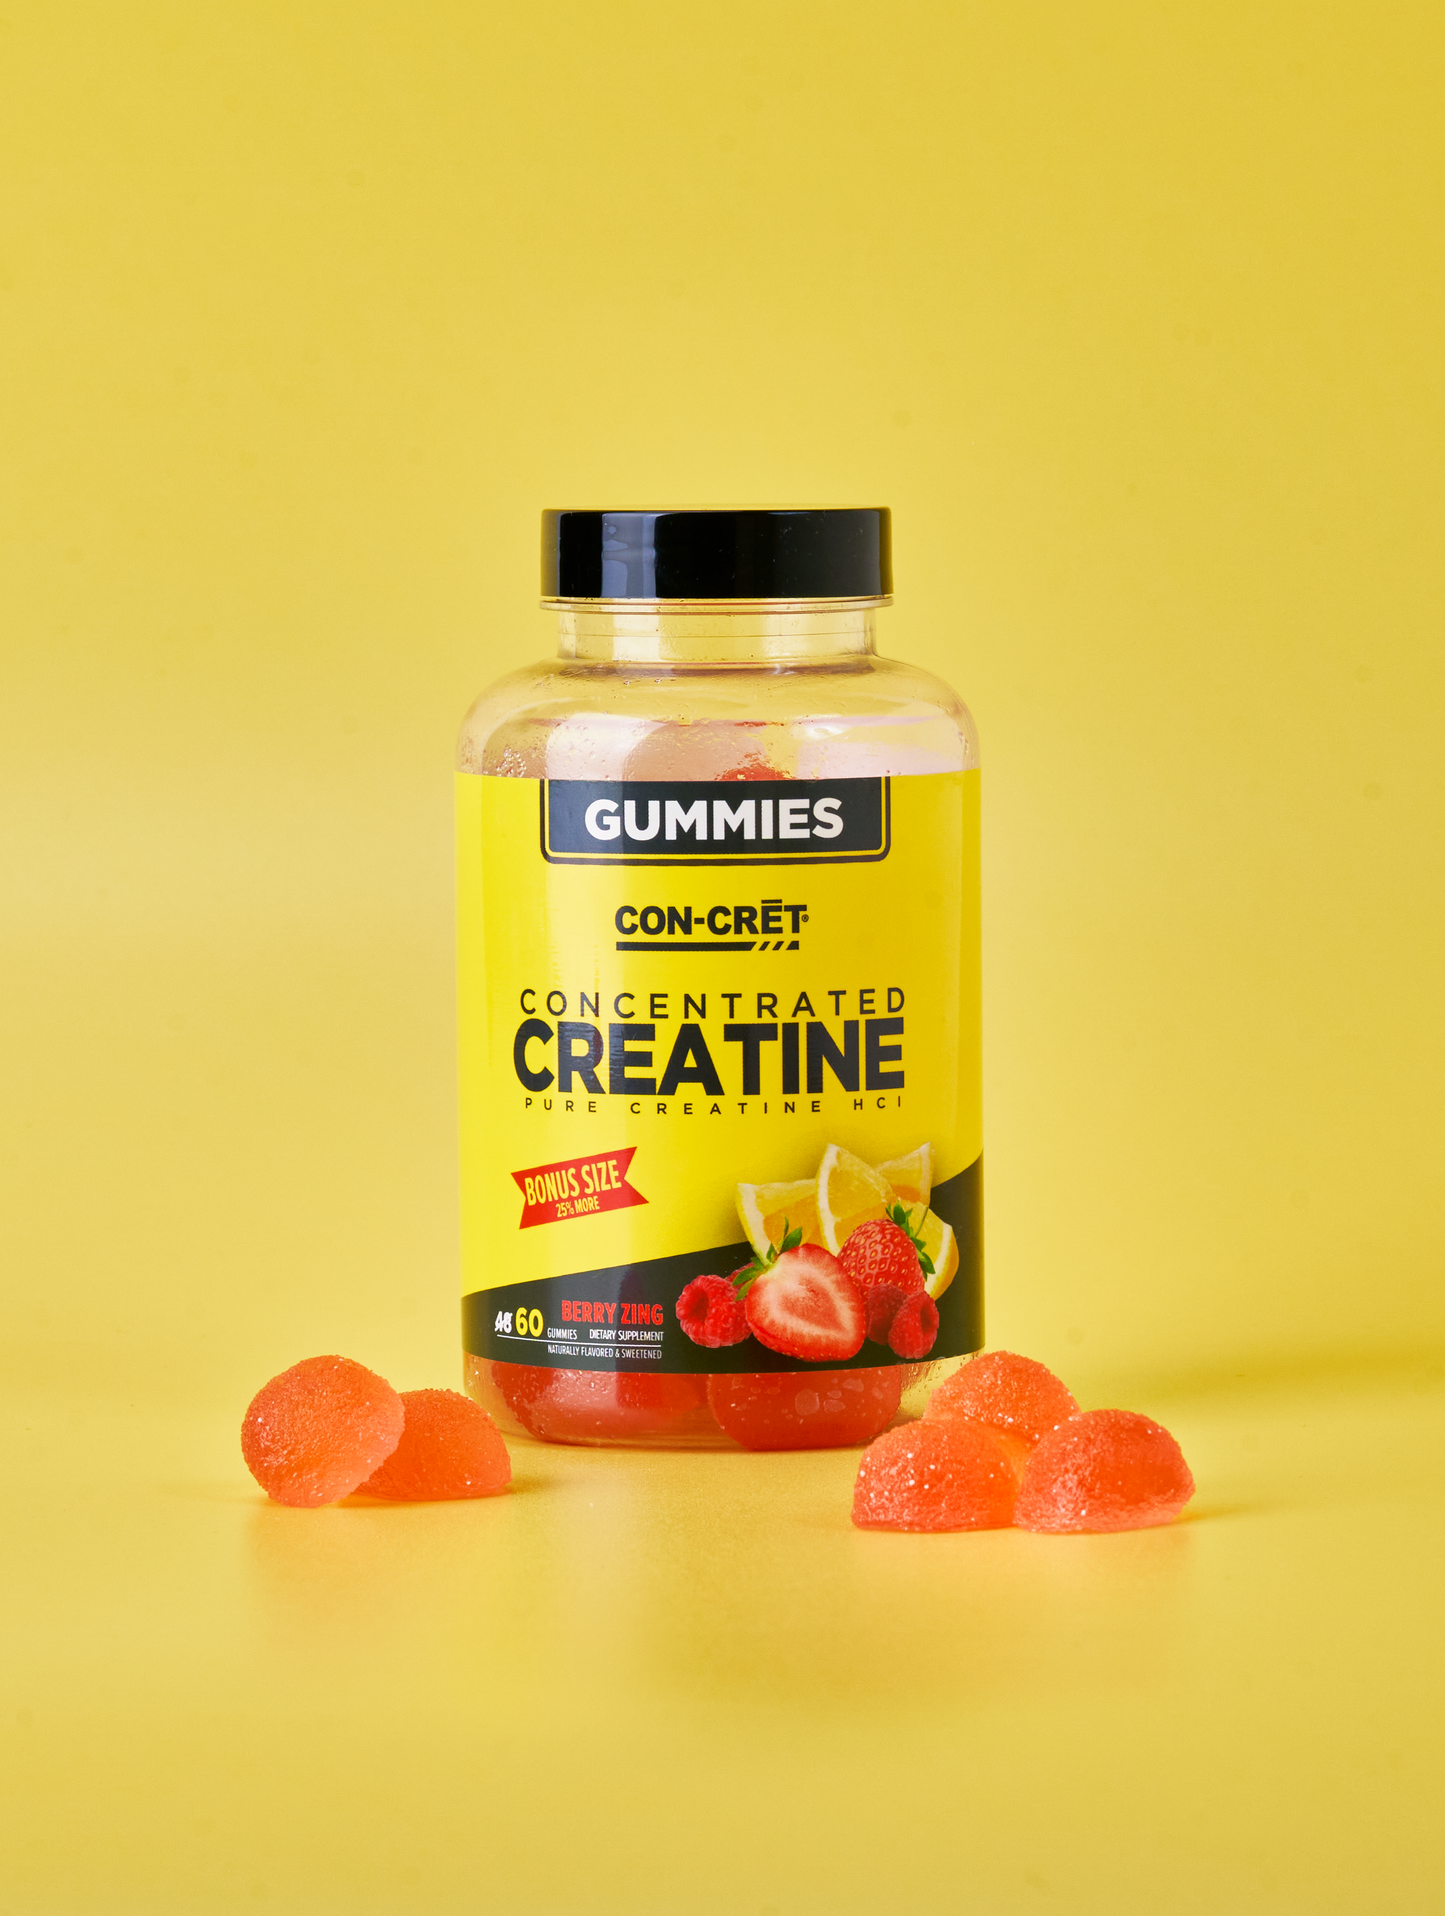 Introducing CON-CRĒT® Creatine Gummies - An Easier Way to Supplement - CON-CRET Patented Creatine HCl